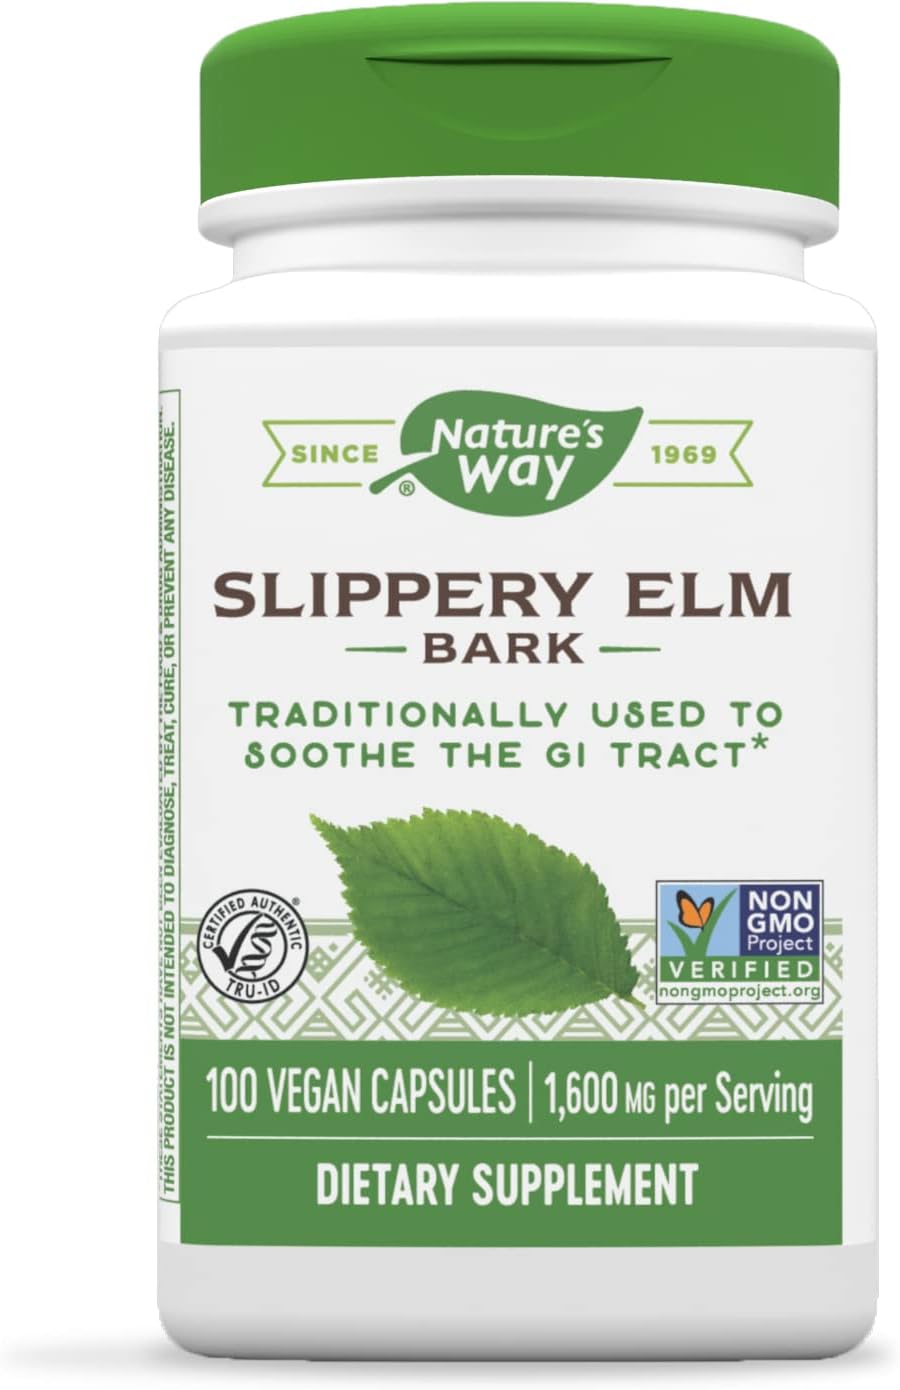 Natures Way Slippery Elm Bark, Tradition…